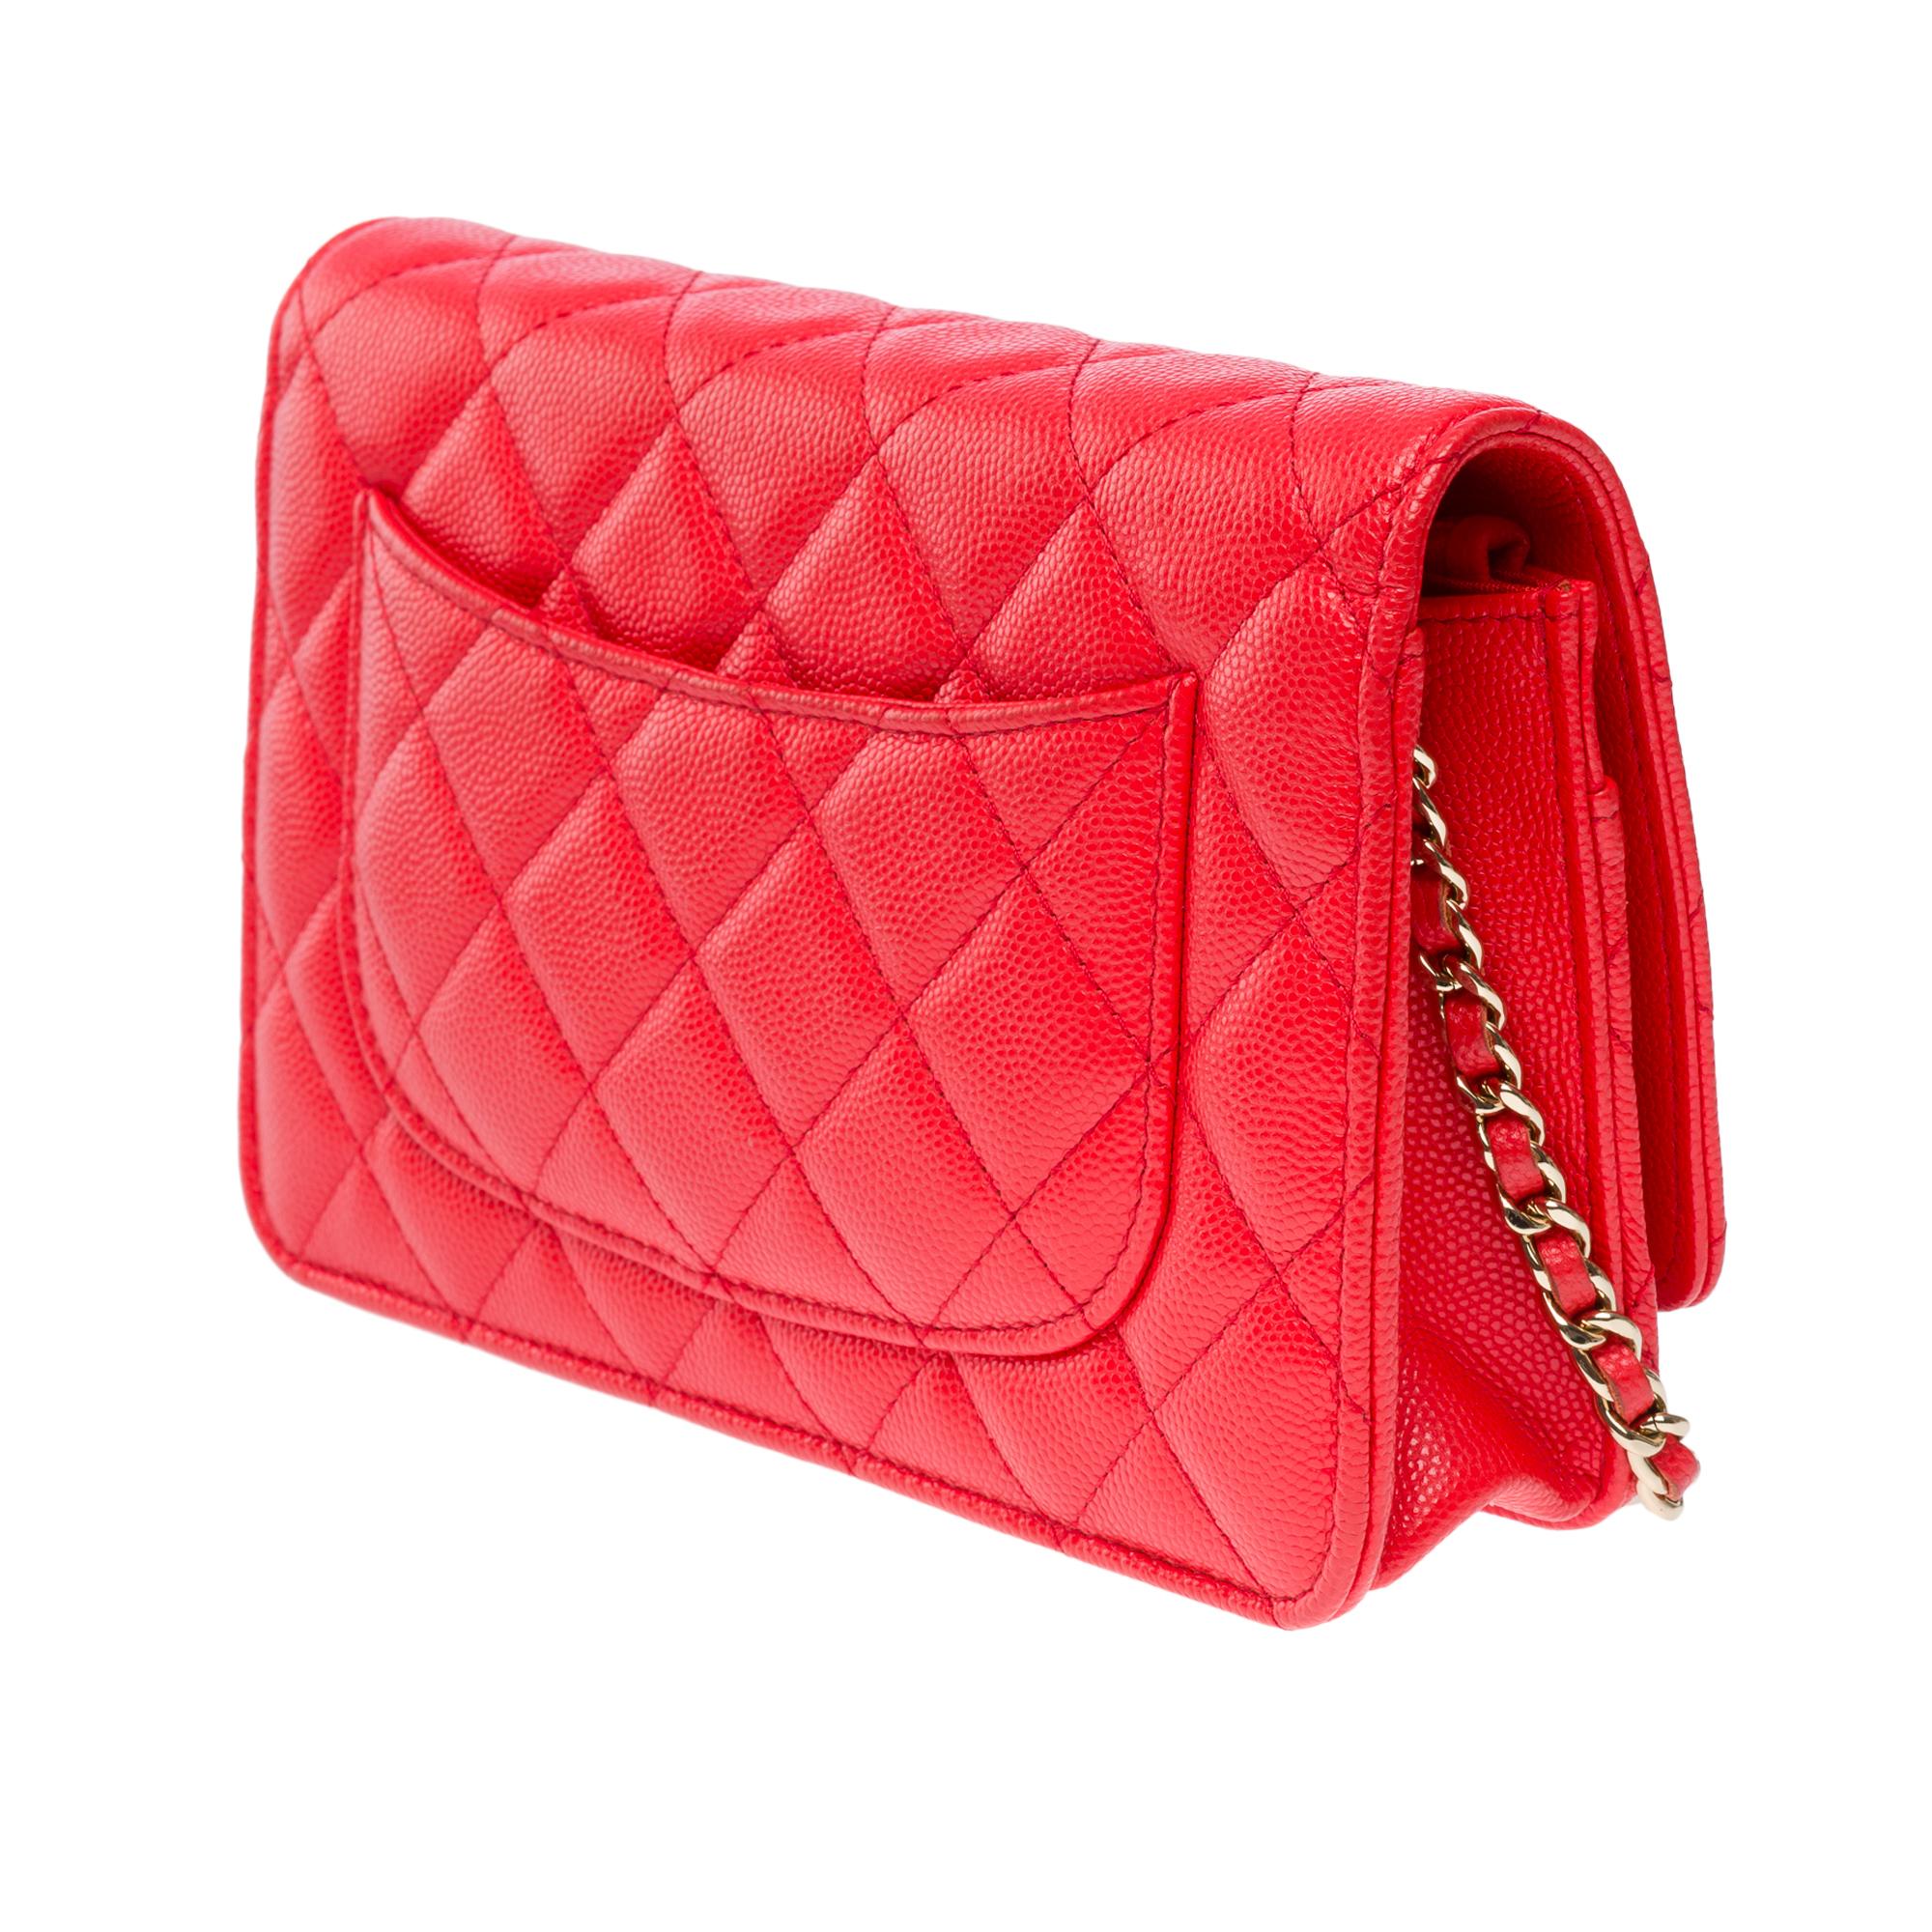 Chanel Wallet on Chain (WOC)  shoulder bag in Red quilted Caviar leather, GHW For Sale 2